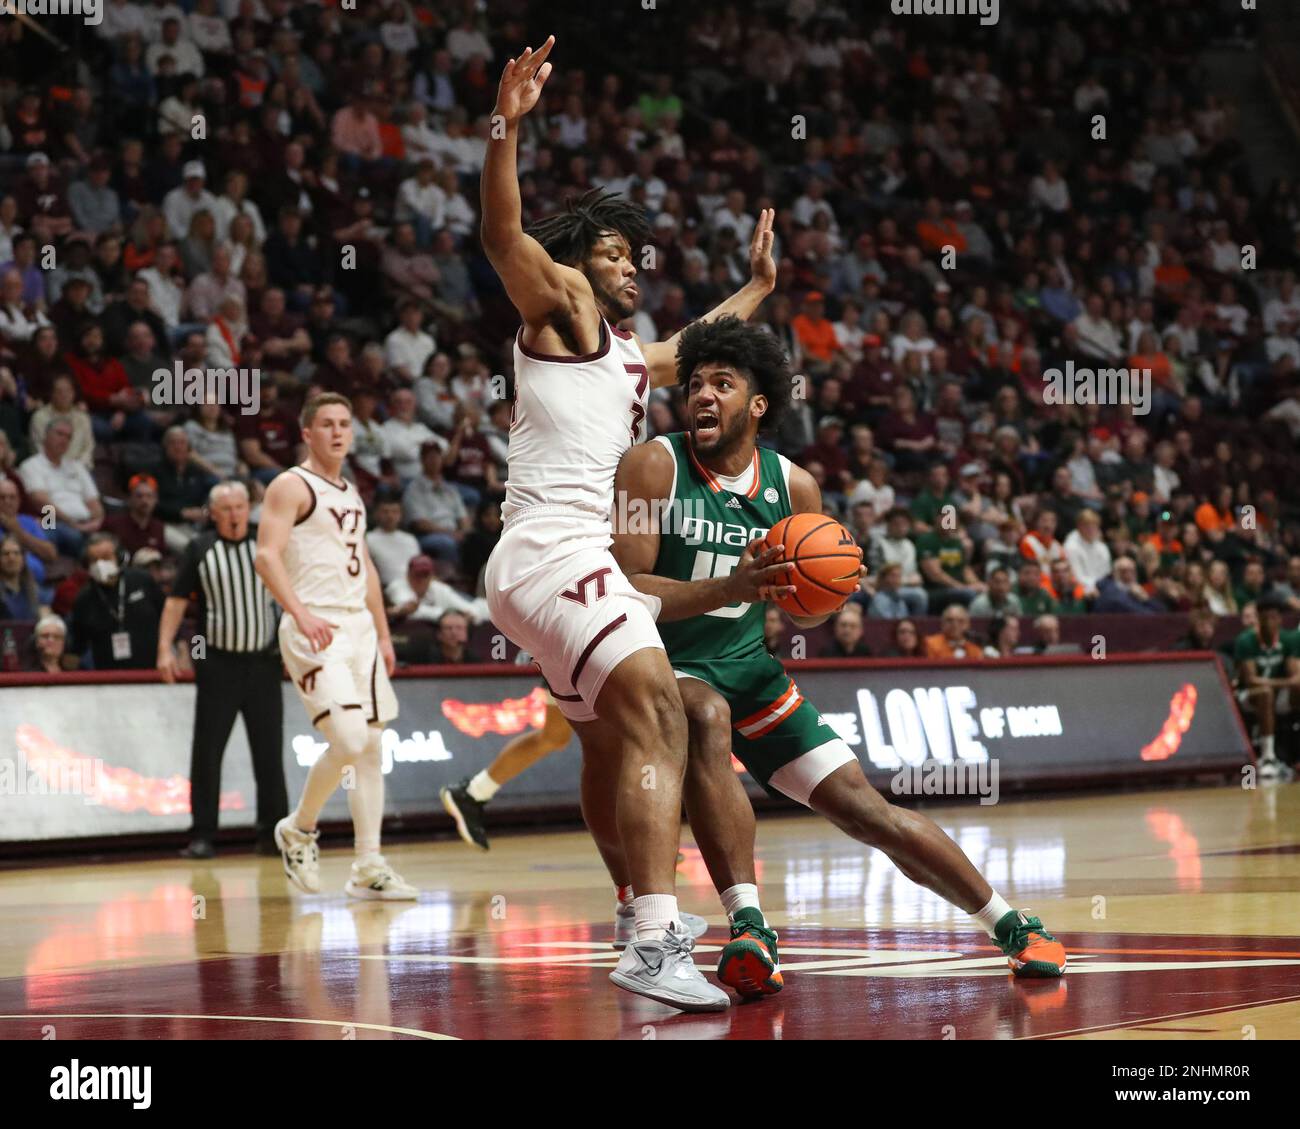 Blacksburg, Virginia, USA. 21st Feb, 2023. Miami (Fl) Hurricanes forward Norchad Omier (15) looks to score in the paint against Virginia Tech Hokies forward Mylyjael Poteat (34) during the NCAA Basketball game between the Miami Hurricanes and the Virginia Tech Hokies at Cassell Coliseum in Blacksburg, Virginia. Greg Atkins/CSM/Alamy Live News Stock Photo